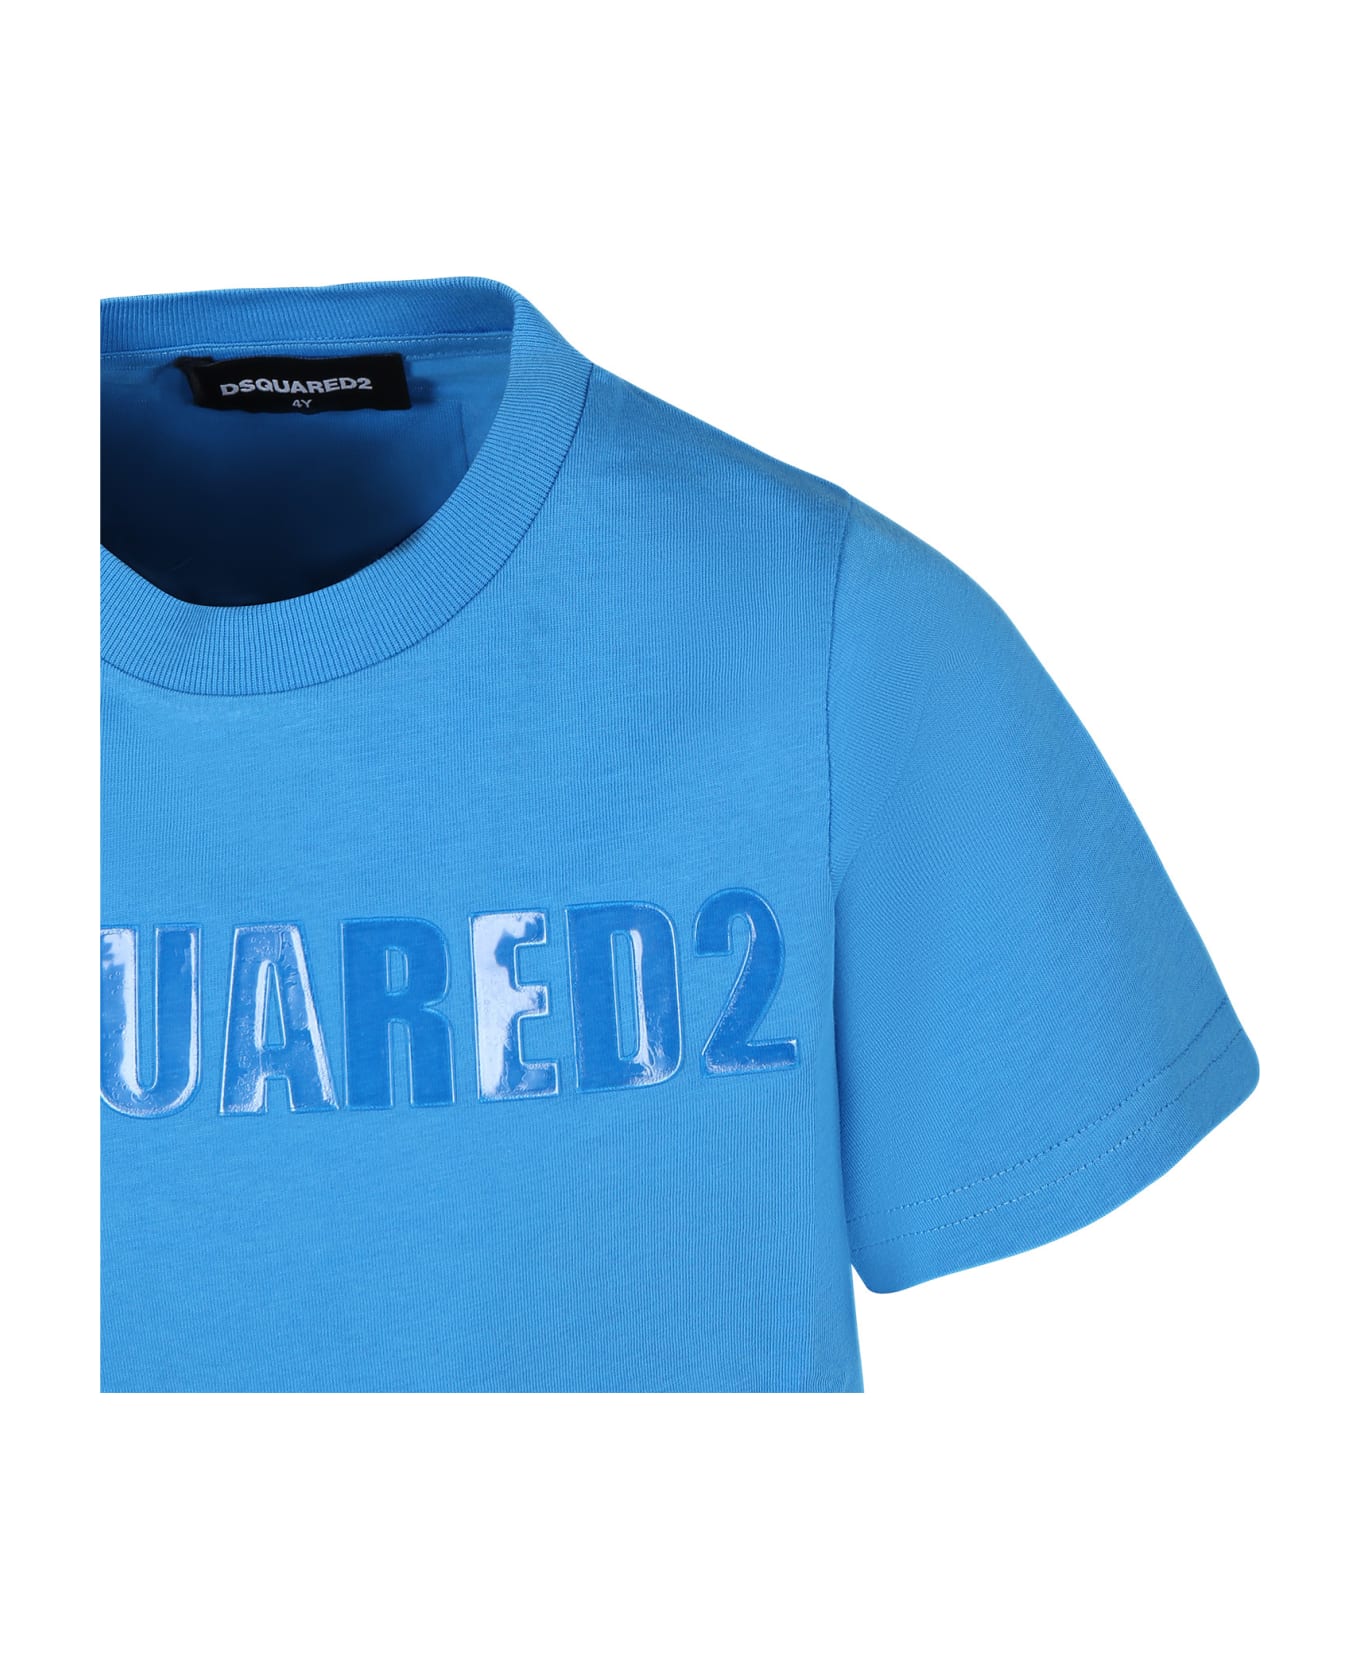 Dsquared2 Sky Blue T-shirt For Boy With Logo - Light Blue Tシャツ＆ポロシャツ